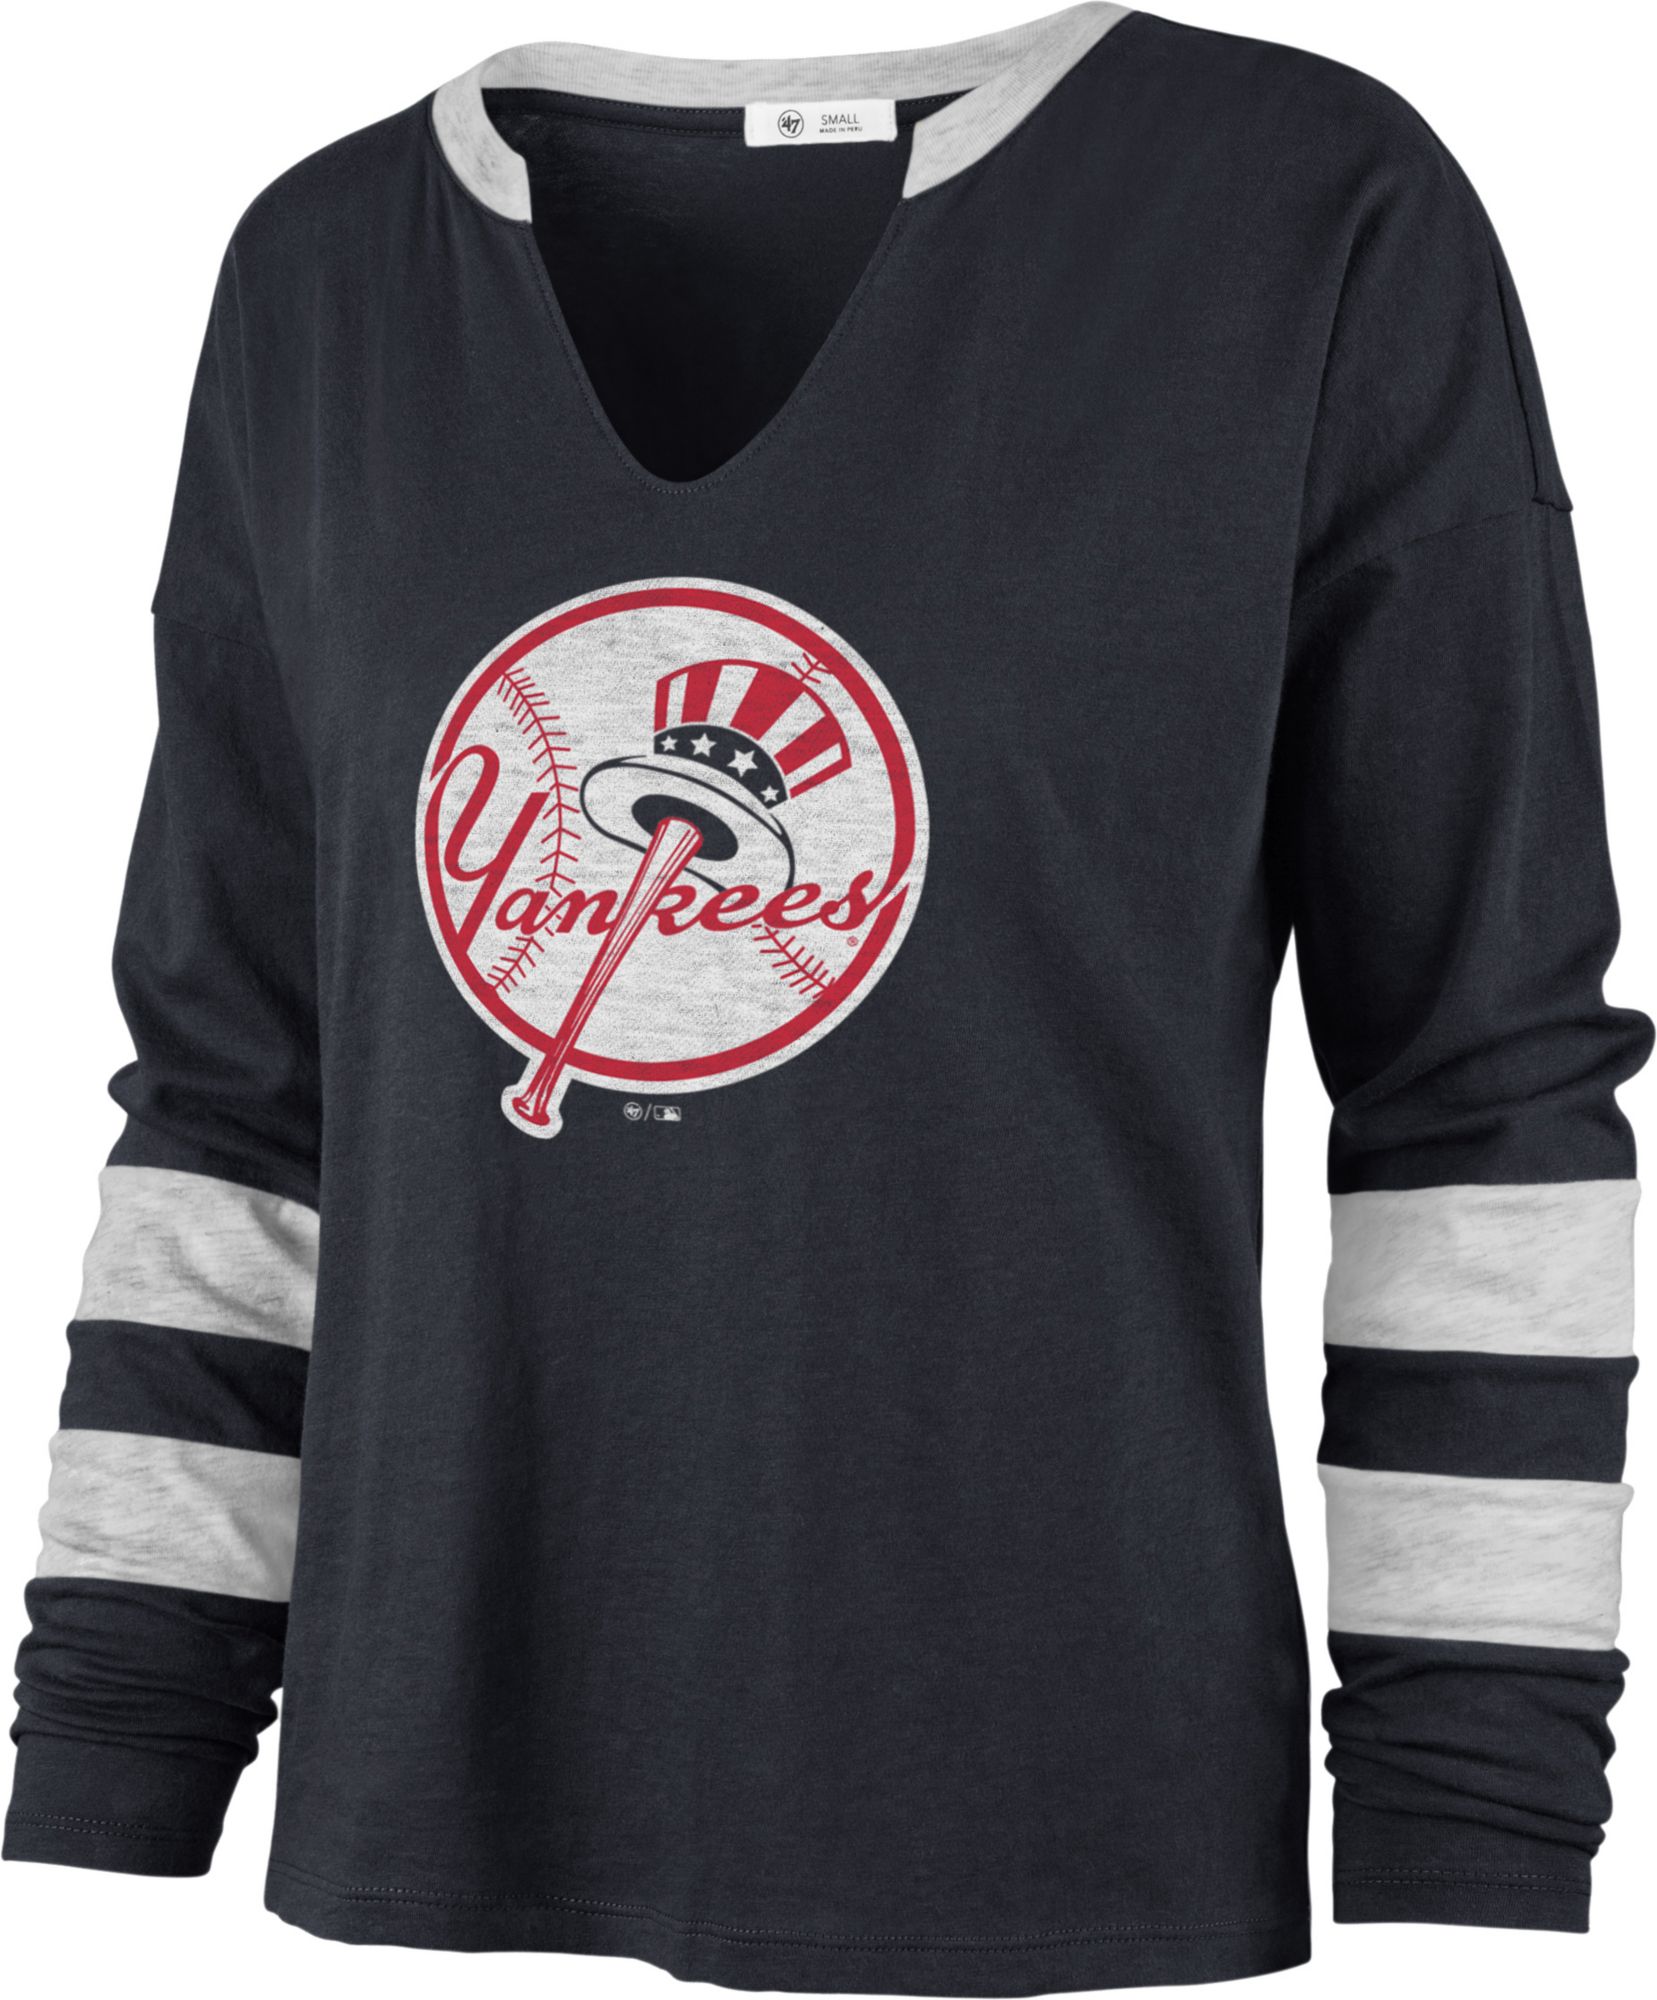 New York Islanders Apparel & Gear  Curbside Pickup Available at DICK'S